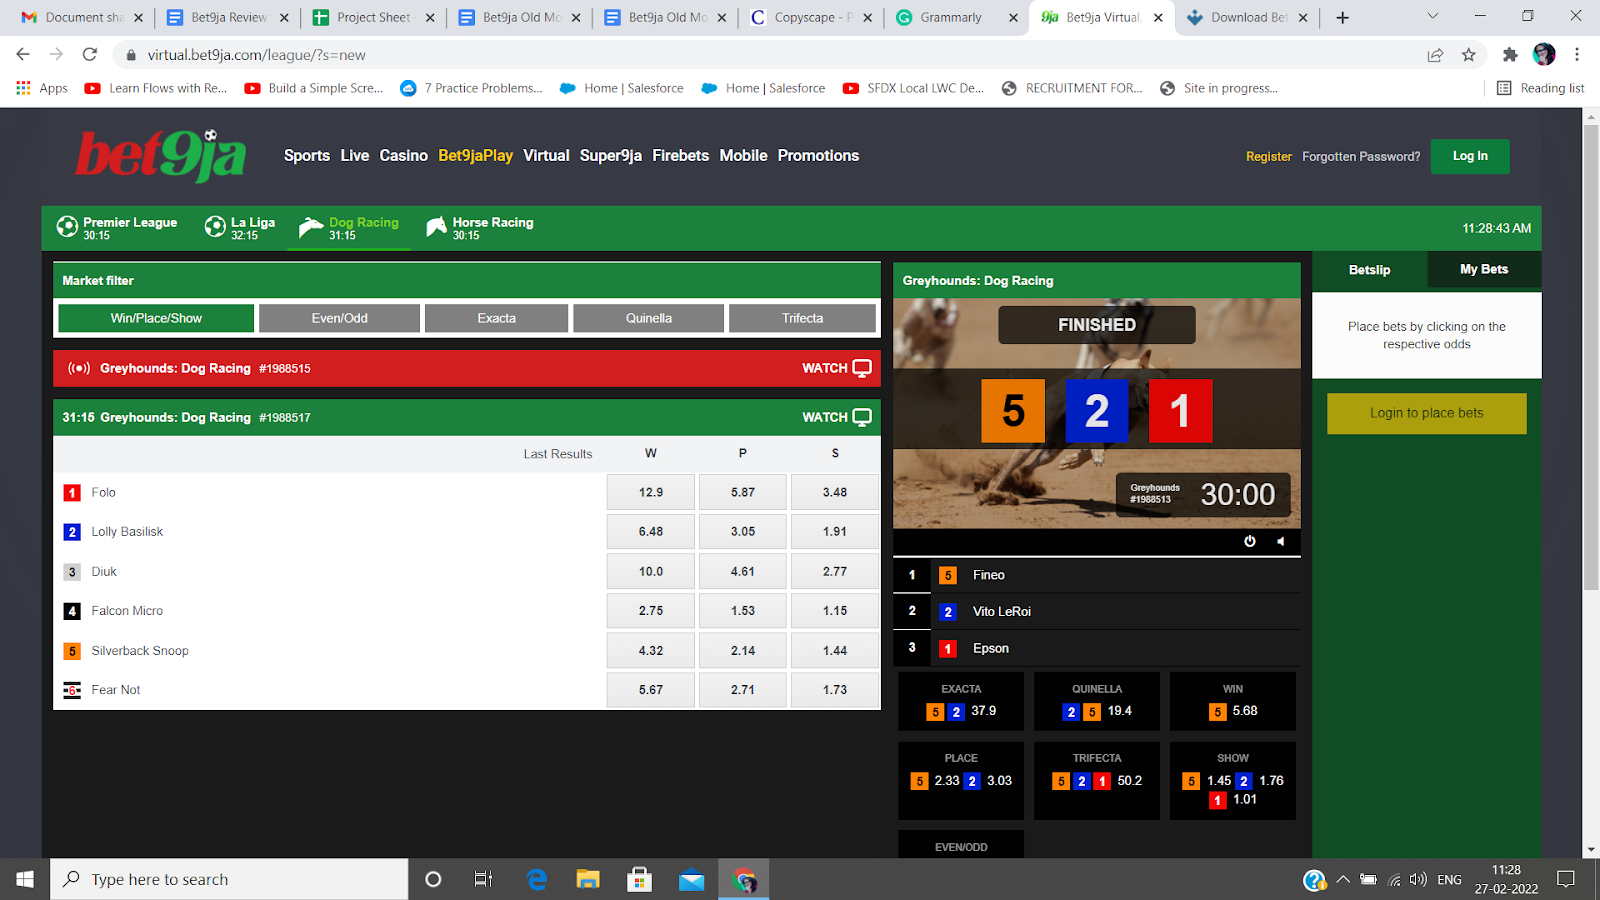 Website of new bet9ja showing the live bets available.